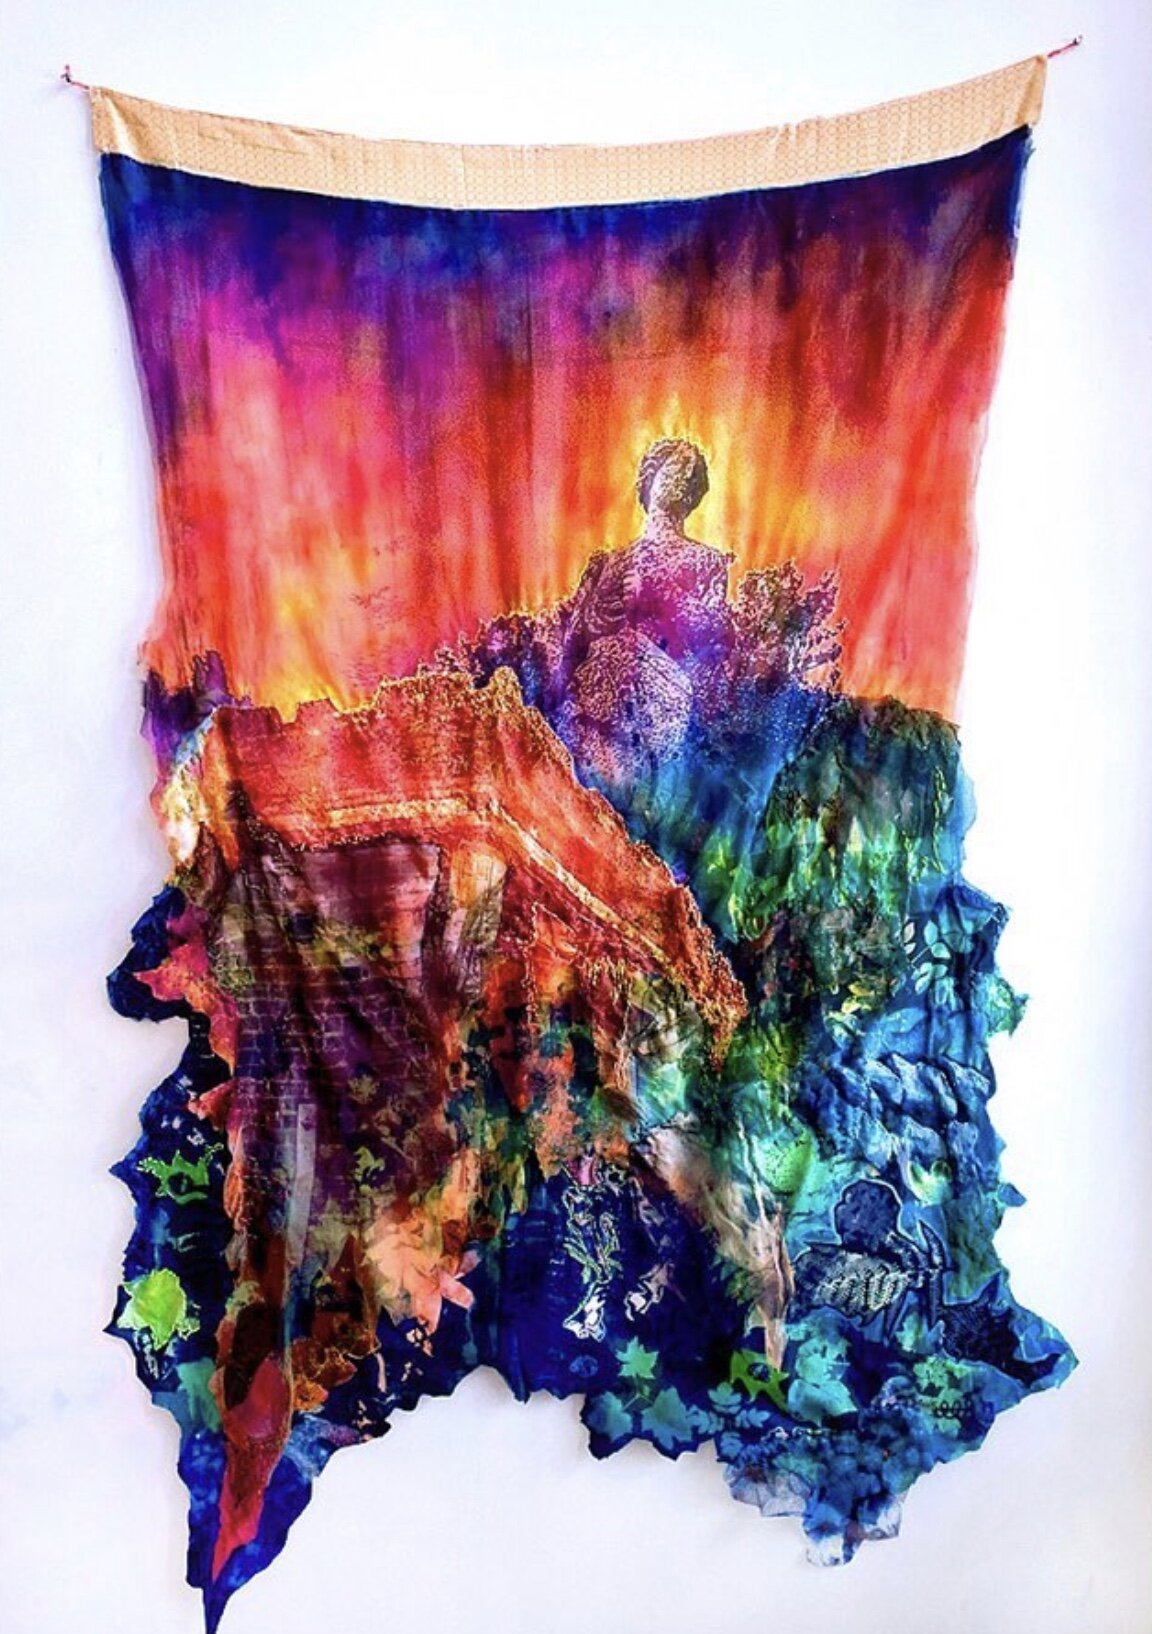  Aubrey Roemer (PiV ‘18),  Burning Bush , 2019. Digital prints on chiffon and organza from holga prints, paint, embroidery, and old household textiles, 54 x 72 in. 